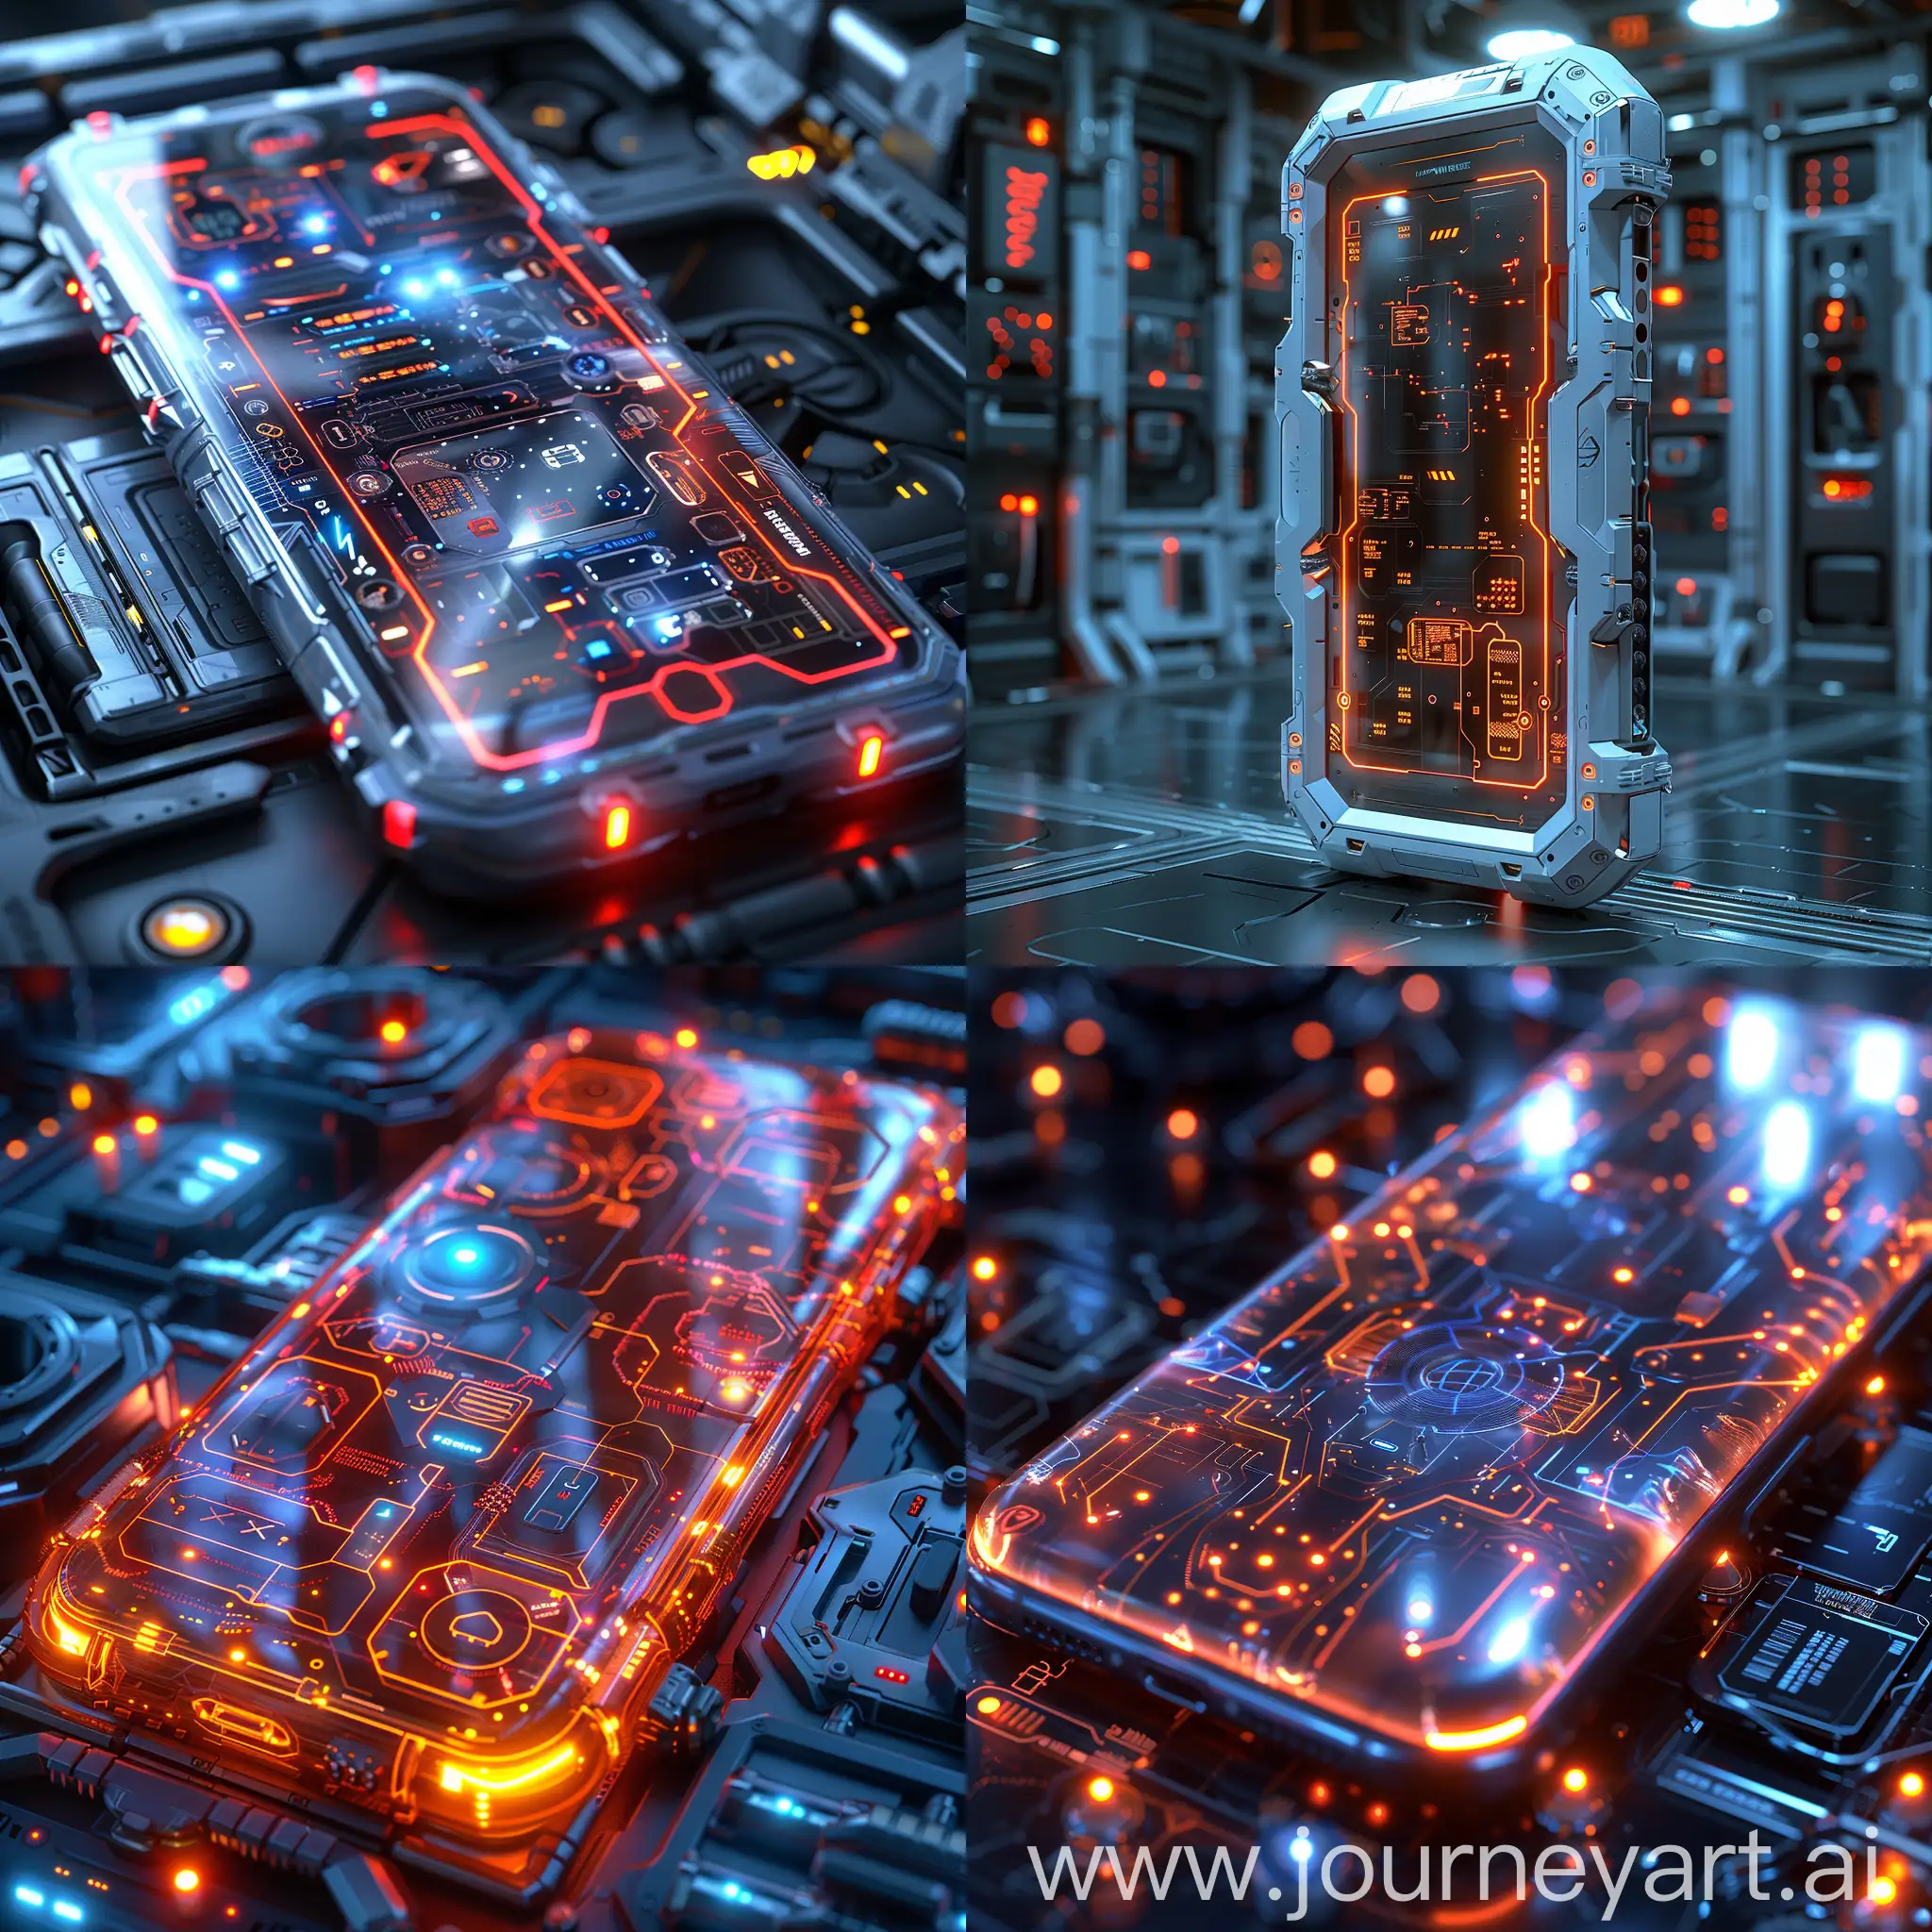 Futuristic-Smartphone-with-Carbon-Footprint-Protection-in-HighTech-Style